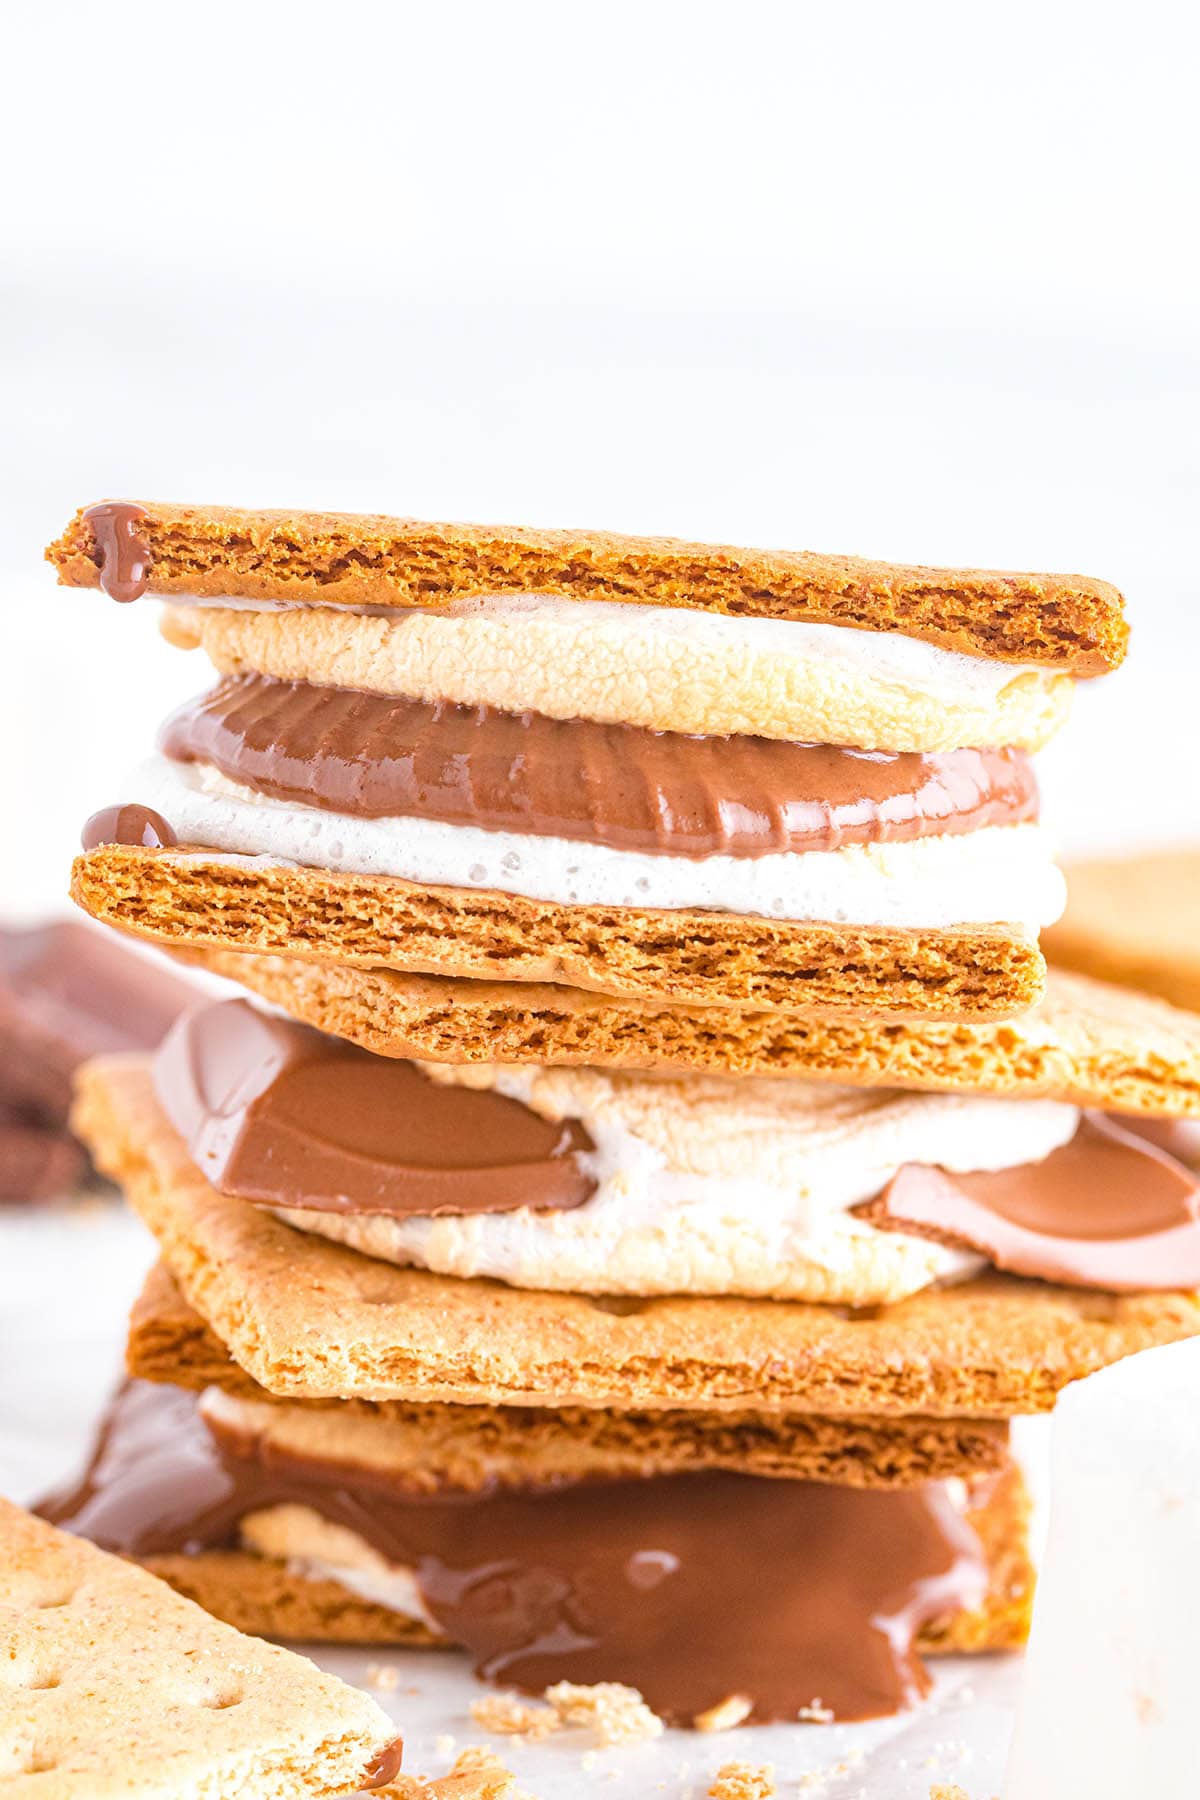 2 pieces of air fryer smores with melted chocolate inside.